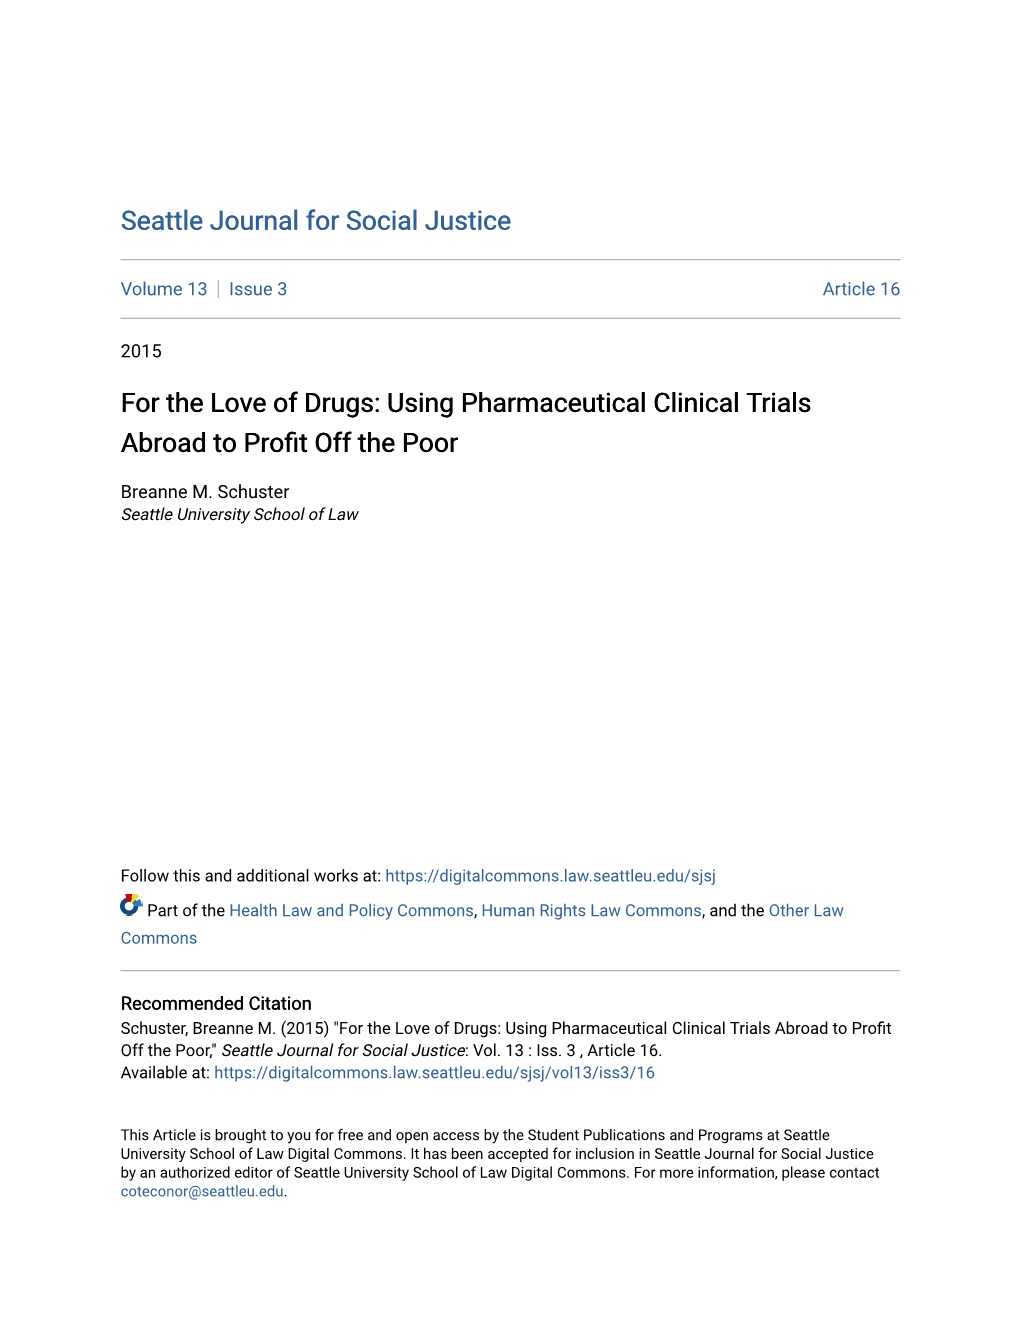 Using Pharmaceutical Clinical Trials Abroad to Profit Off the Poor," Seattle Journal for Social Justice: Vol